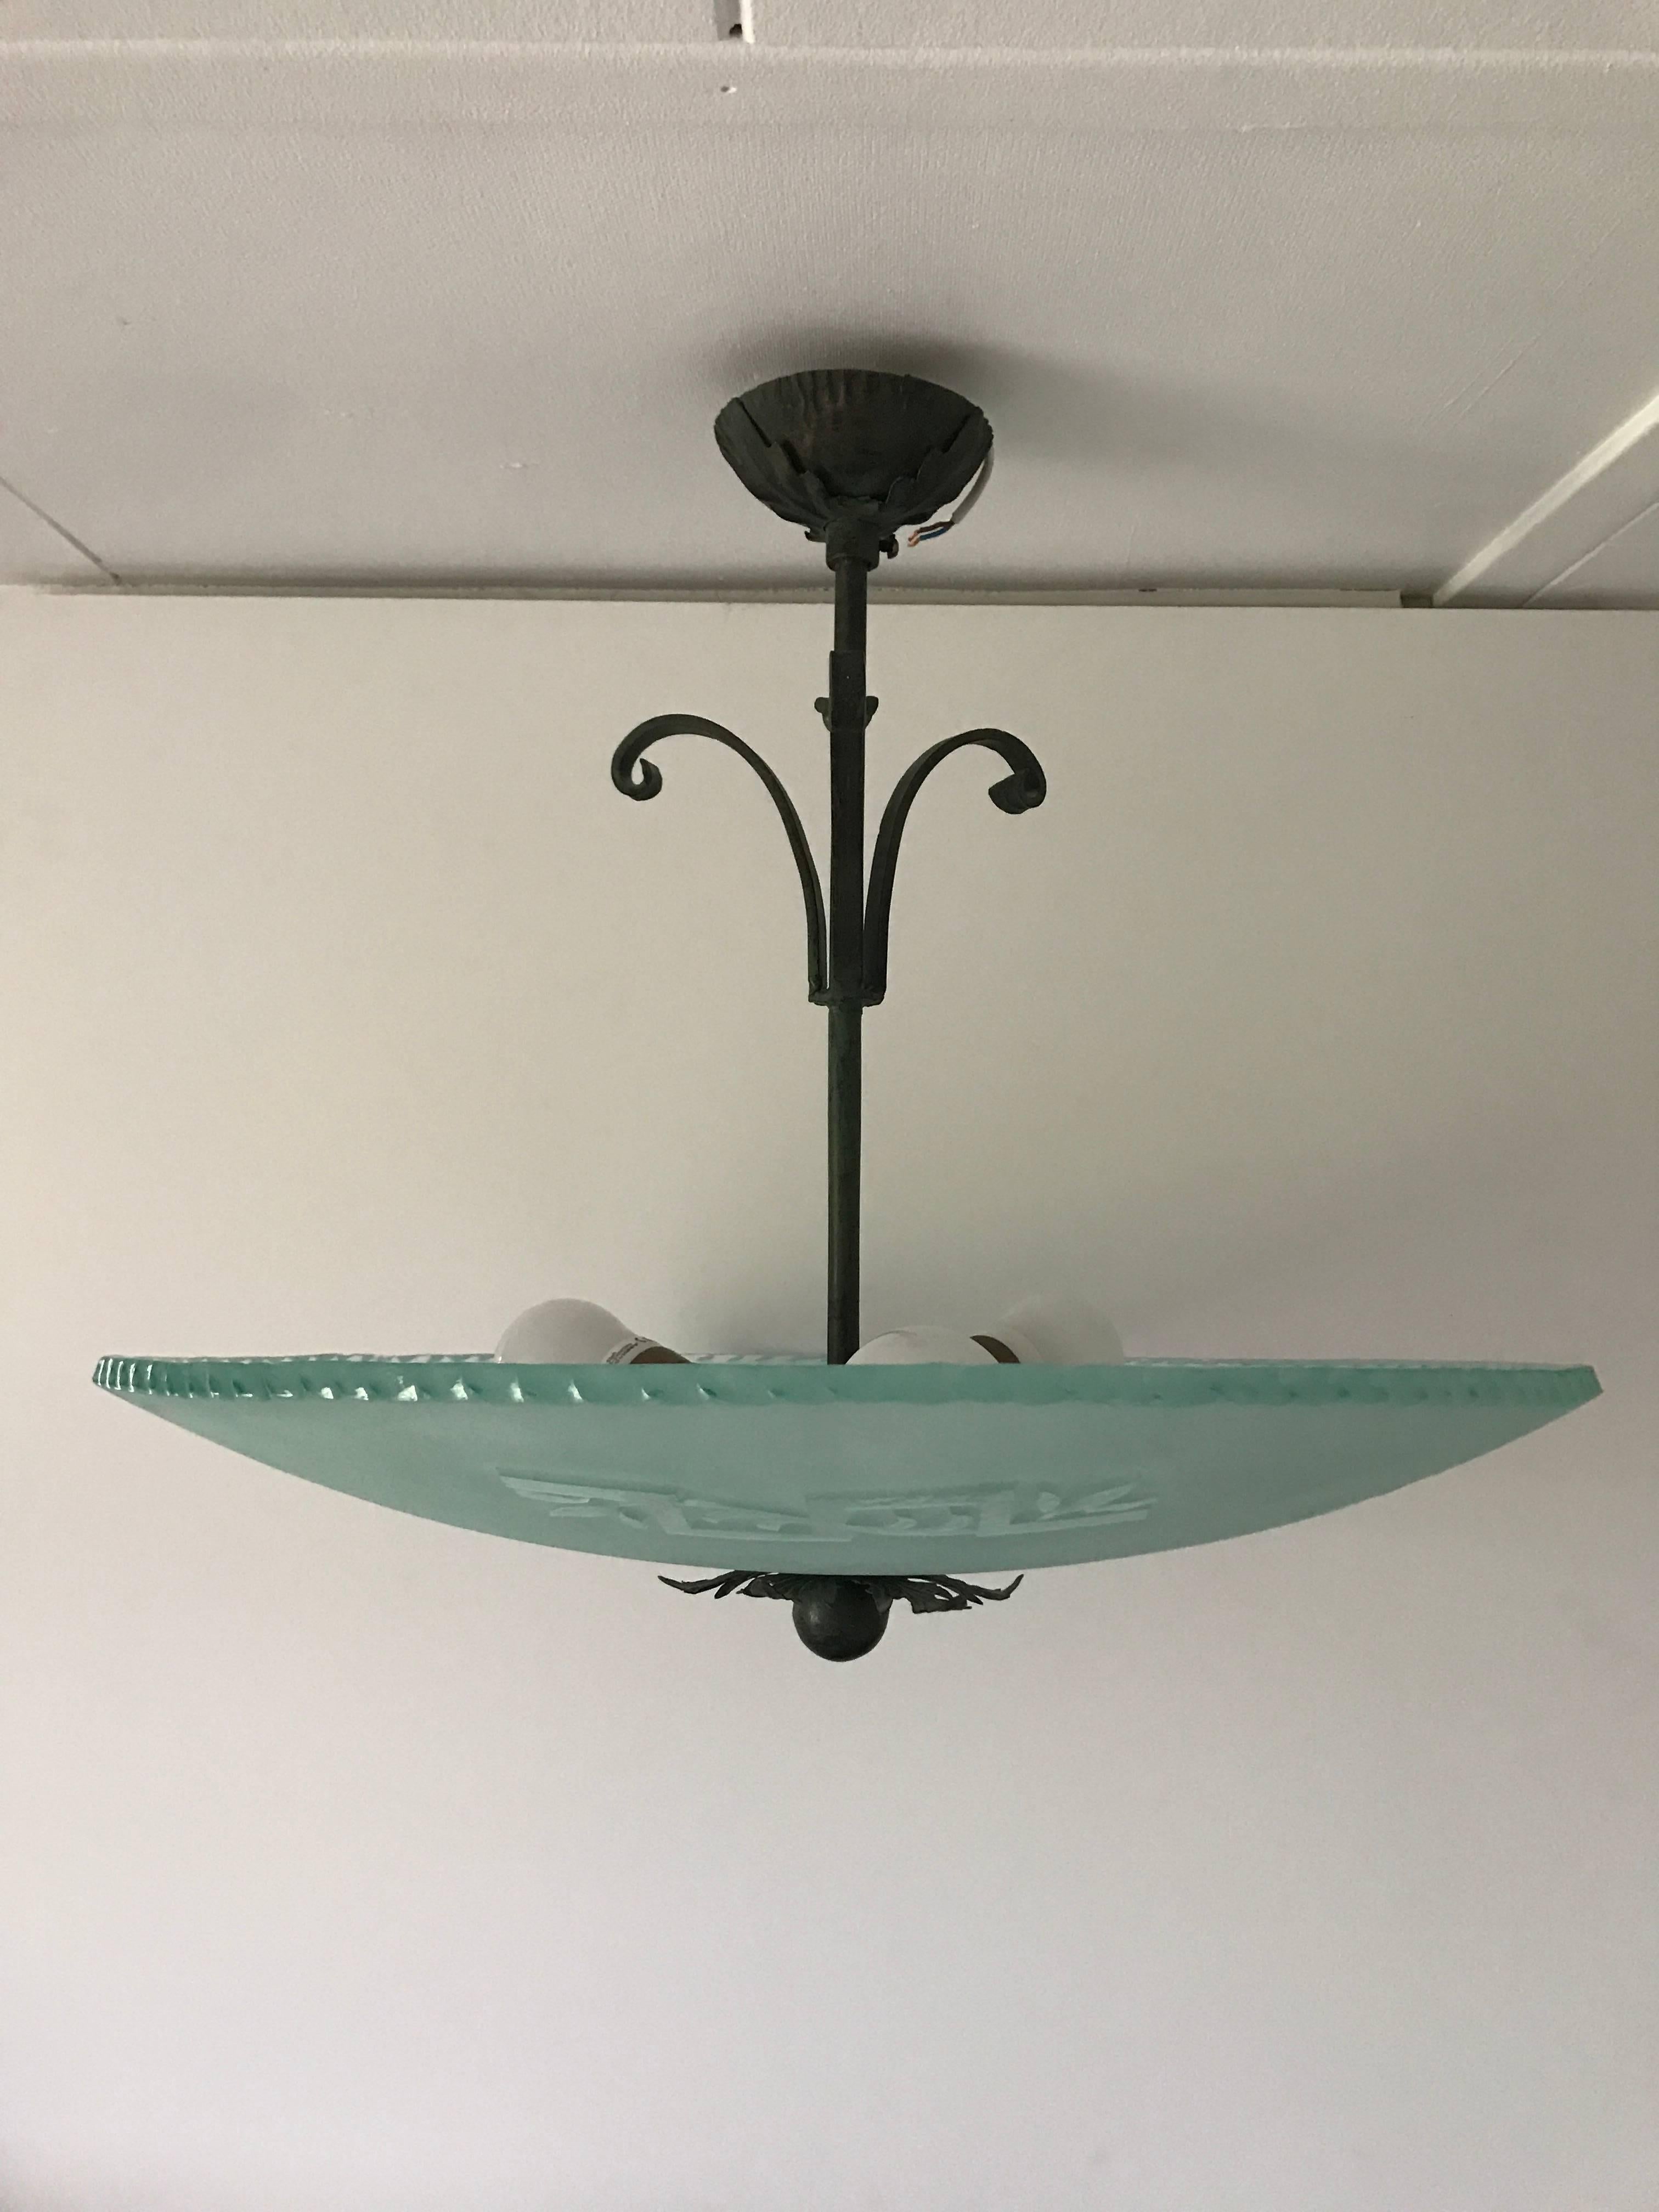 1935 Art Deco Swedish frosted and etched glass pendant.
This beautiful pendant light fixture was most likely made at Orrefors in the south of Sweden. The beautiful frosted shade has an exquisite Art Deco pattern etched into it. The shade has a